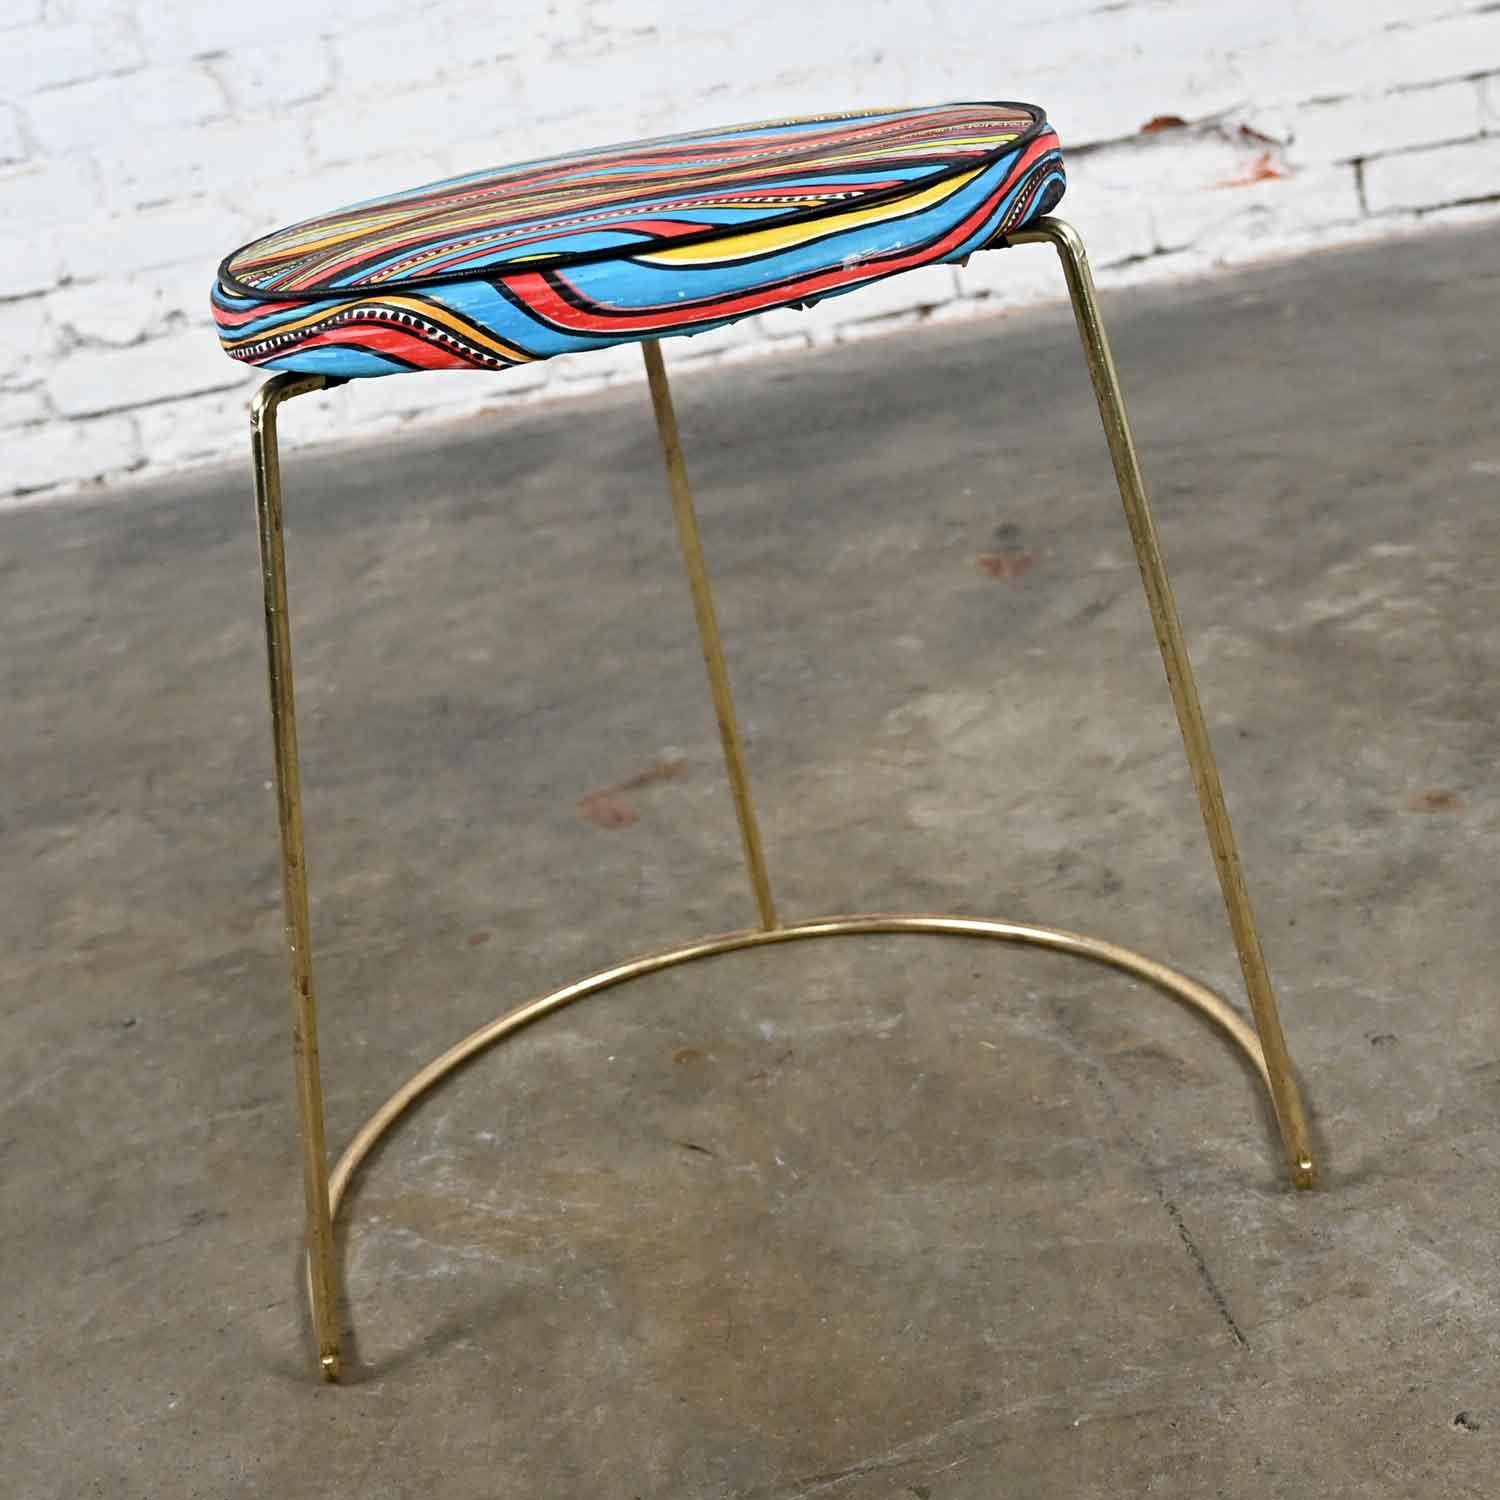 Wonderful vintage mid-century modern stool with its original colorful round vinyl or faux leather seat and a brass plated steel asymmetric base. Beautiful condition, keeping in mind that this is vintage and not new so will have signs of use and